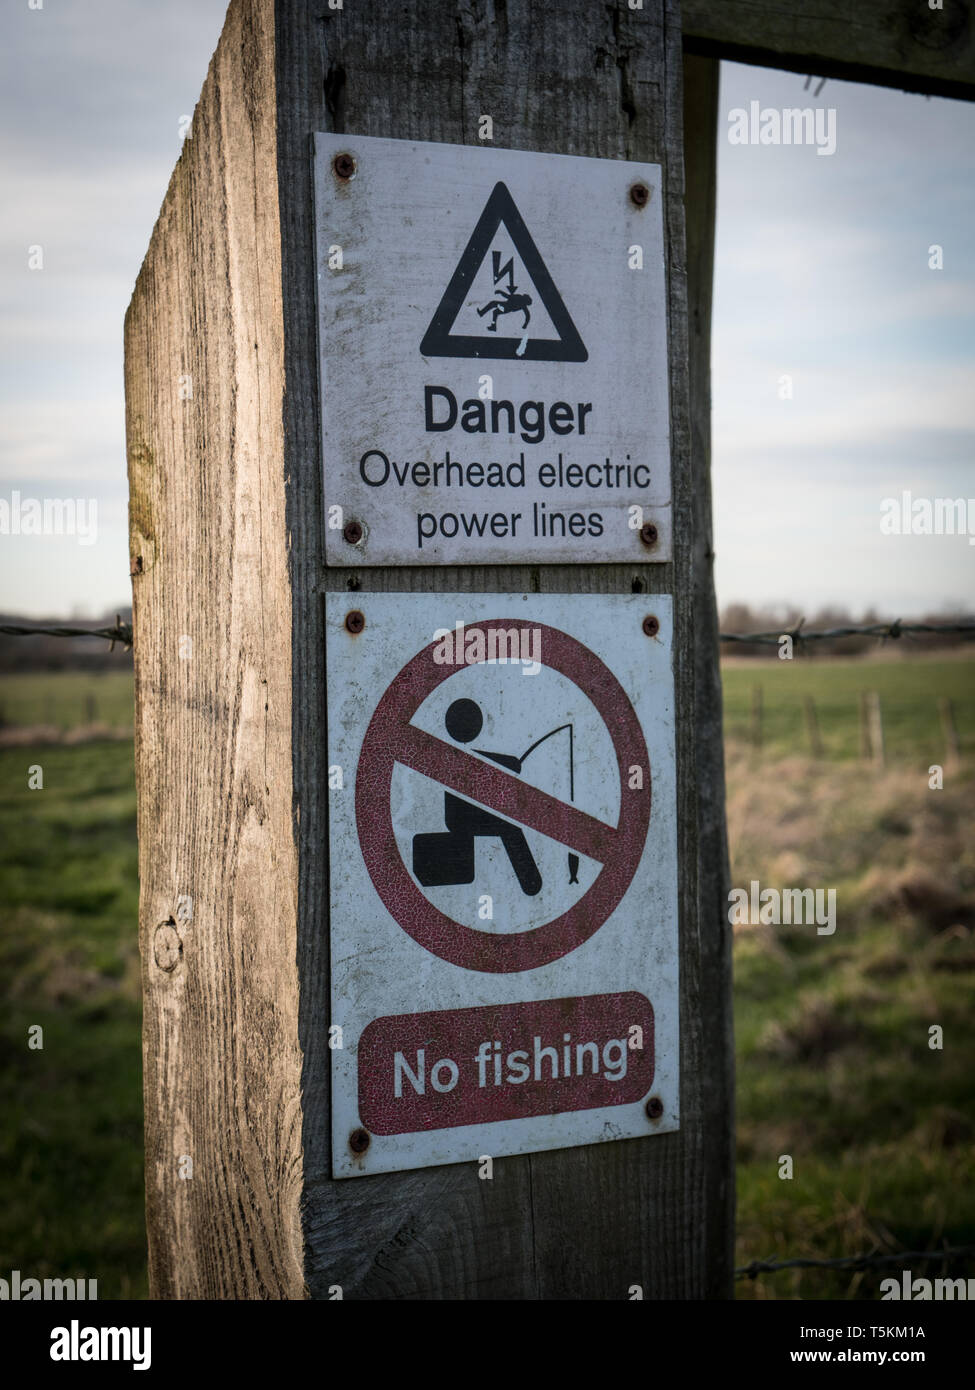 Safety warning signs relating to overhead power lines and fishing restrictions. England UK. Stock Photo